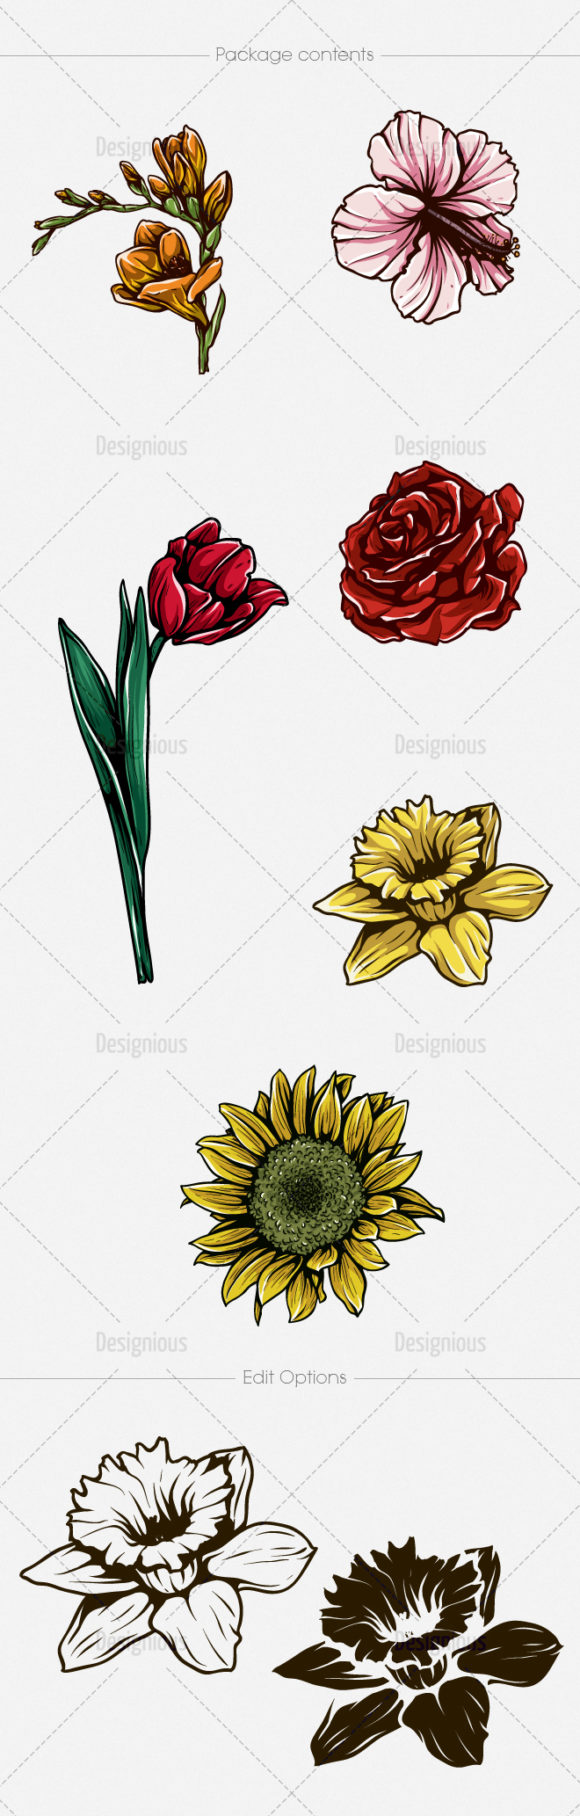 Floral Vector Pack 118 2